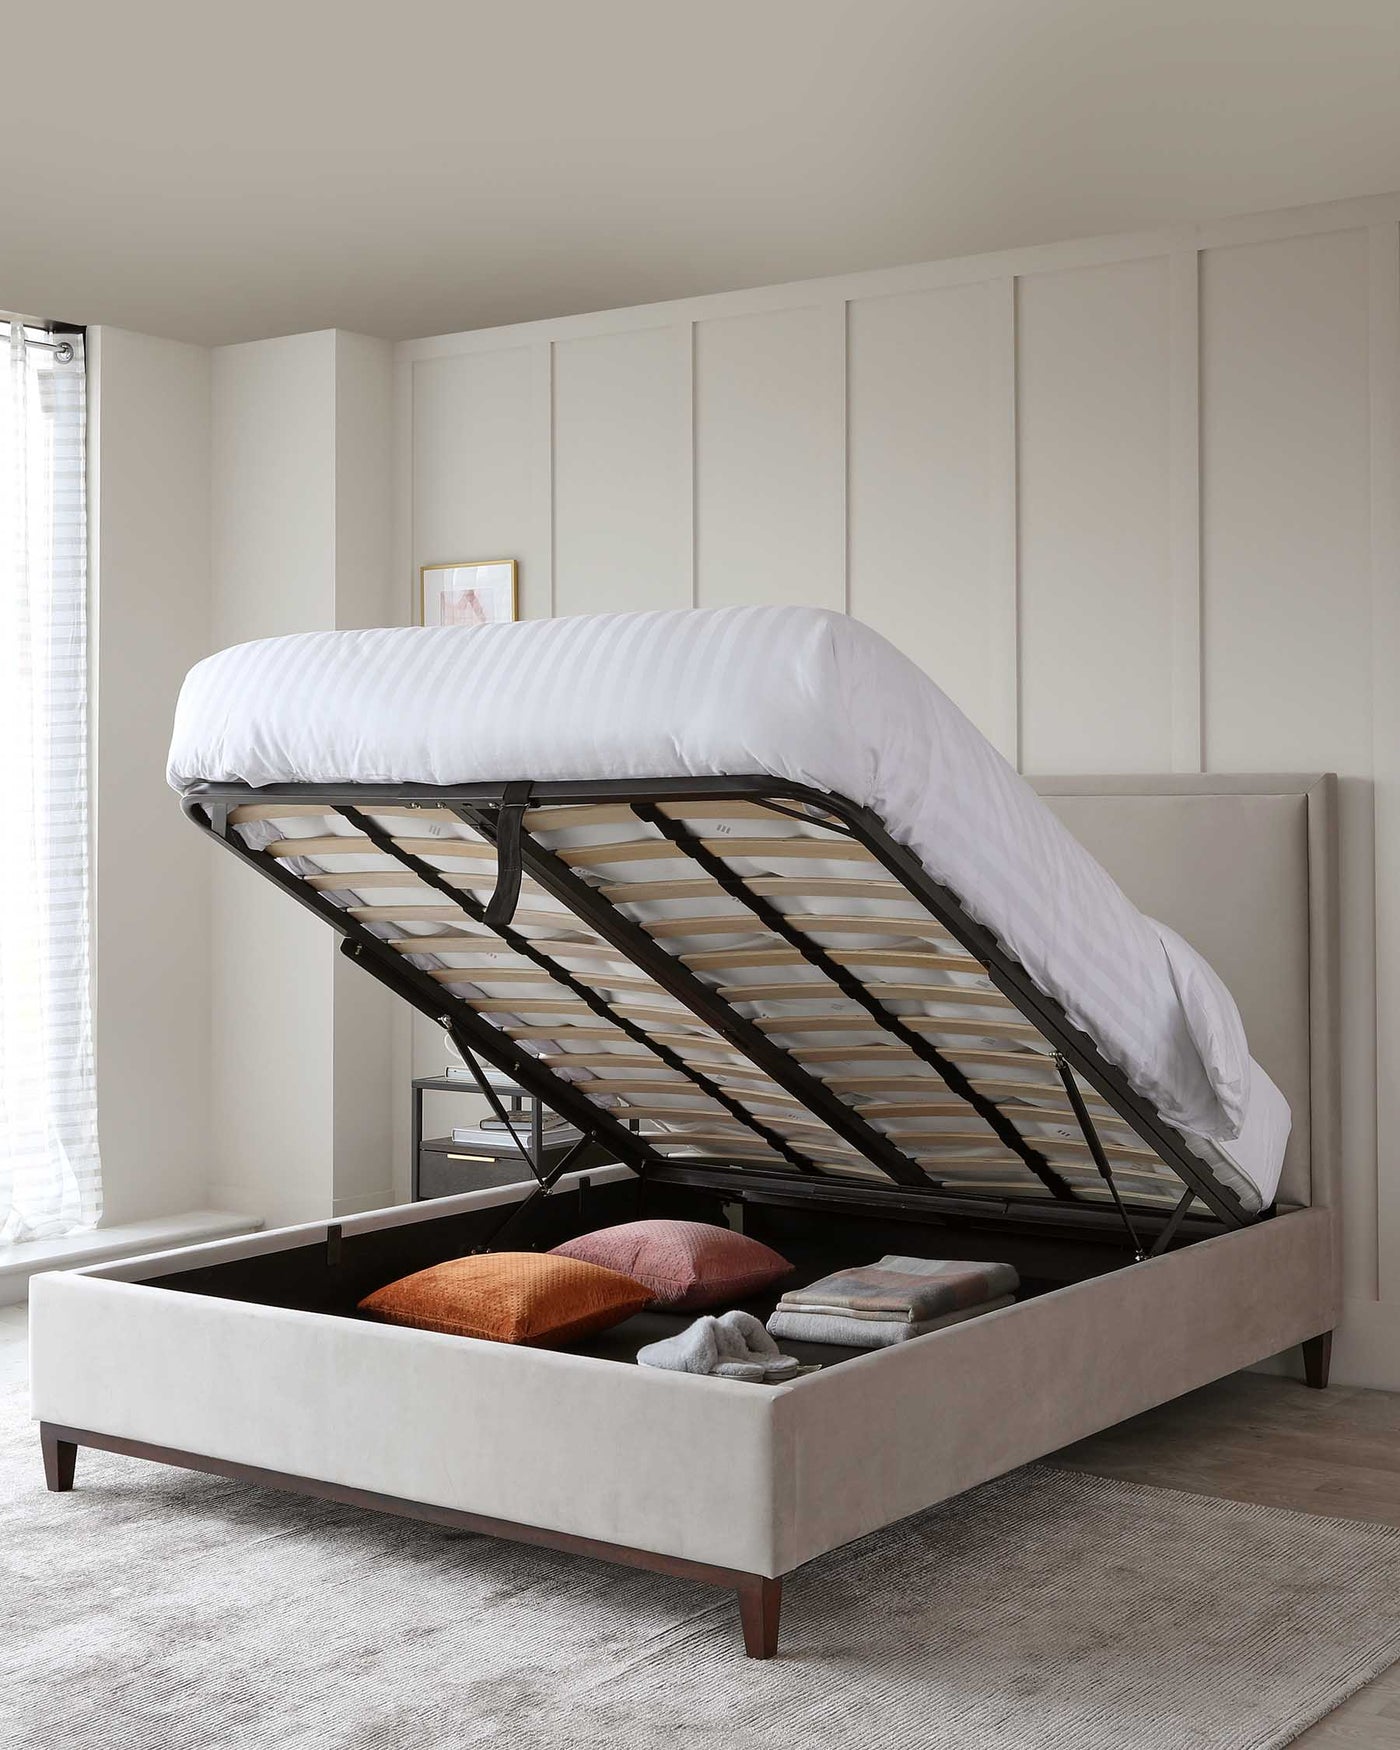 Elegant light grey upholstered storage bed with a lifted mattress base revealing an organized under-bed storage compartment containing pillows, blankets, and other linens.